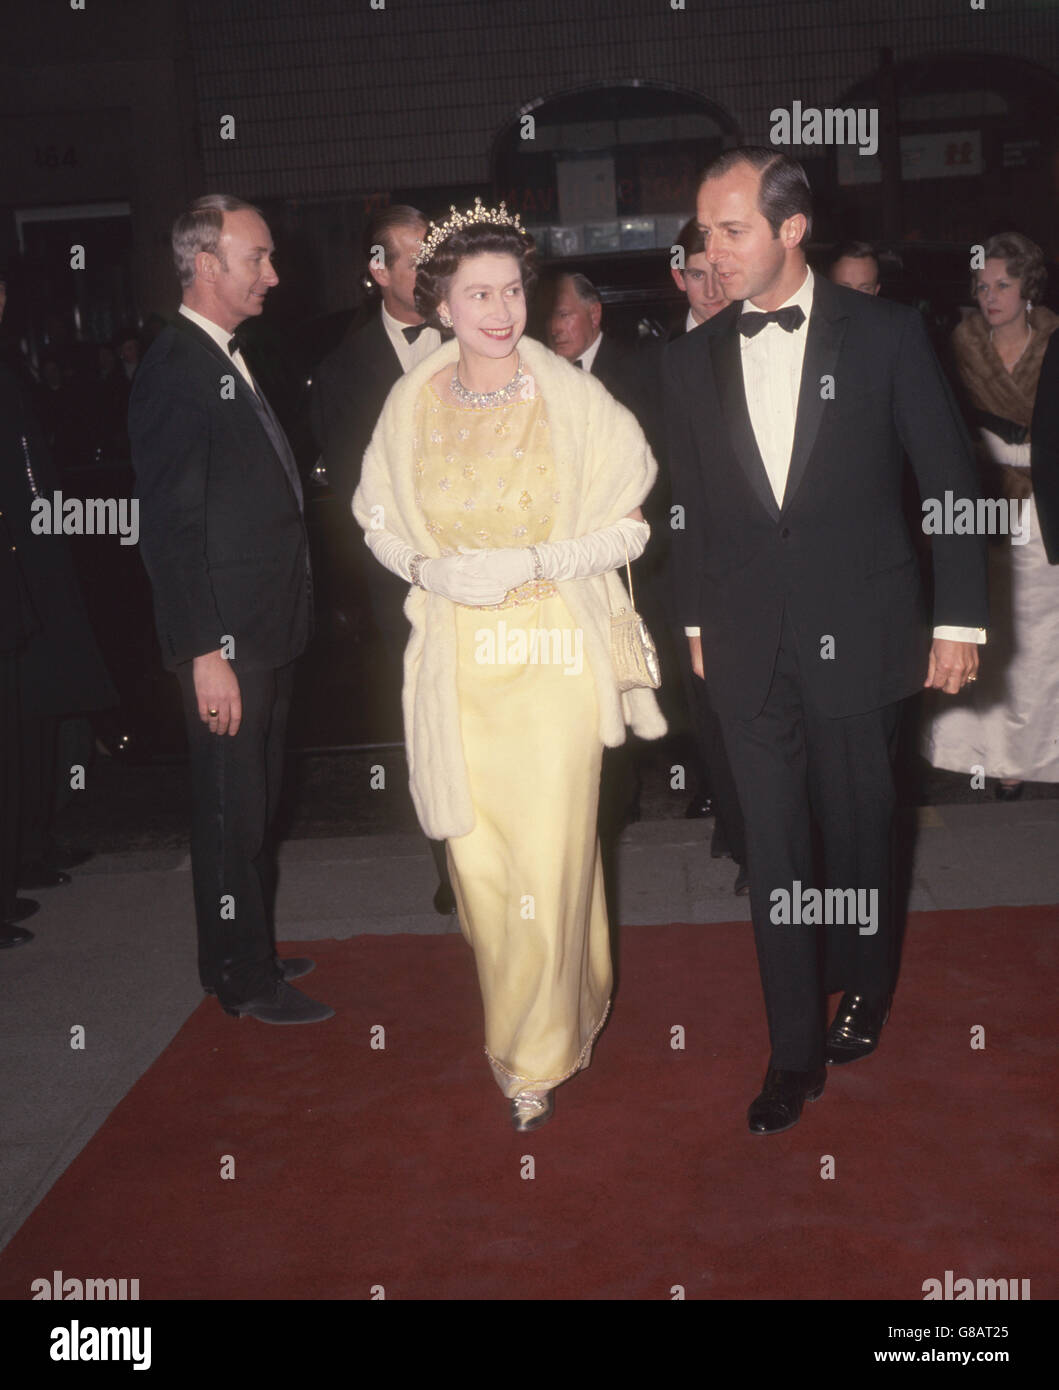 The Queen arriving at the Saville Theatre, London, to attend a performance of 'The Mikado' by the D'Oyly Carte Company in aid of the Royal General Theatrical Fund Association. She was accompanied by the Duke of Edinburgh and the Prince of Wales (not pictured). Stock Photo